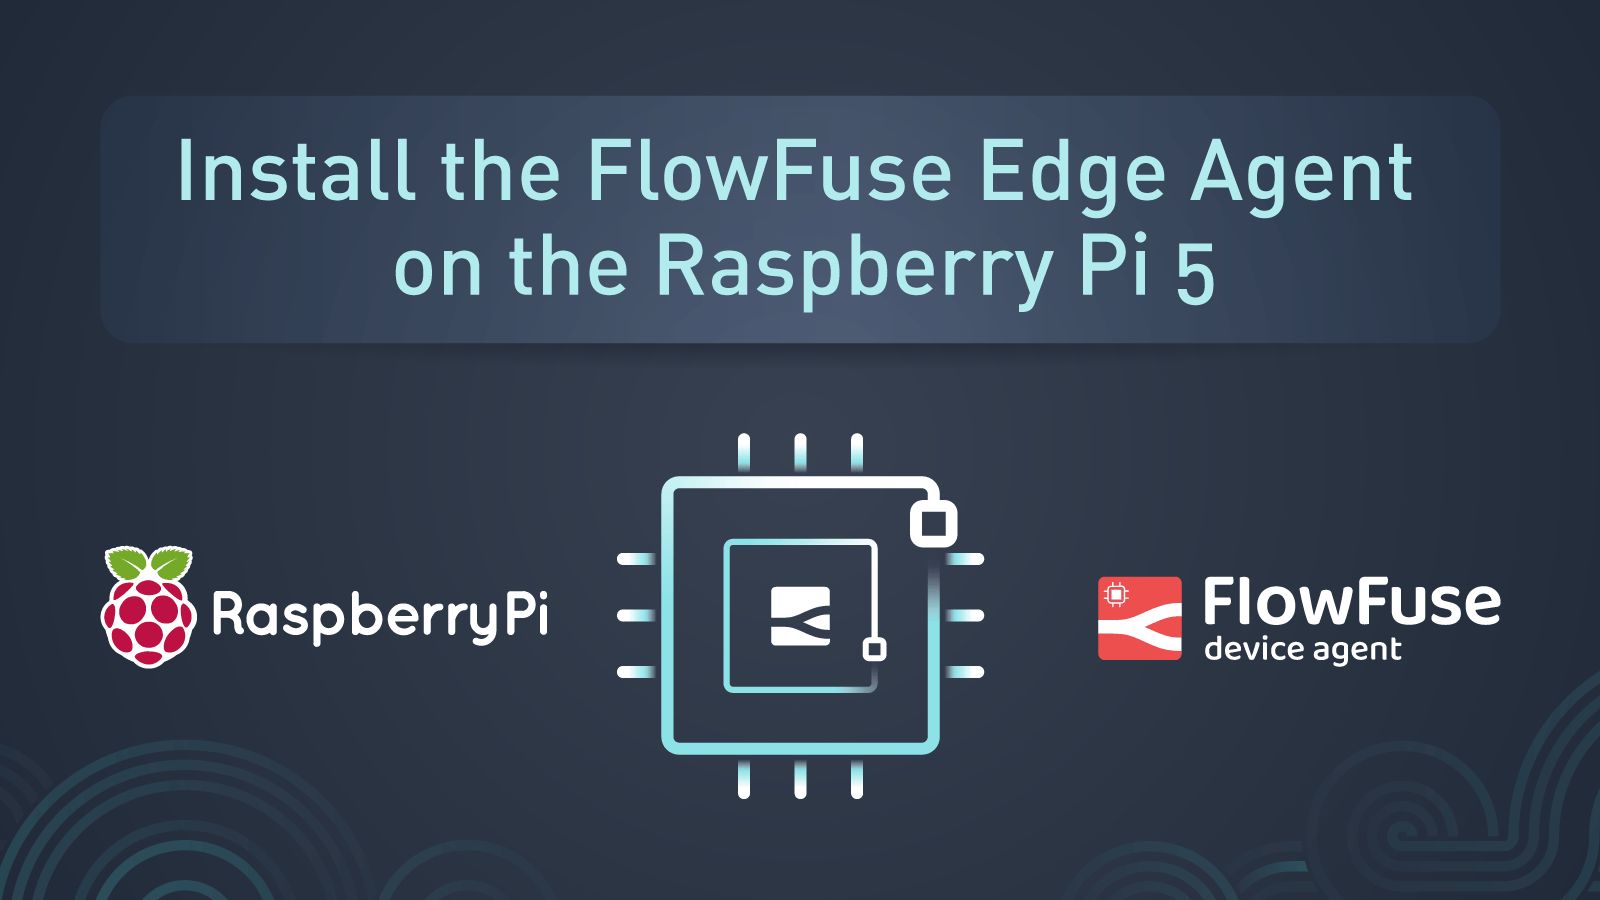 Image representing Install the FlowFuse Edge Agent on the Raspberry Pi 5